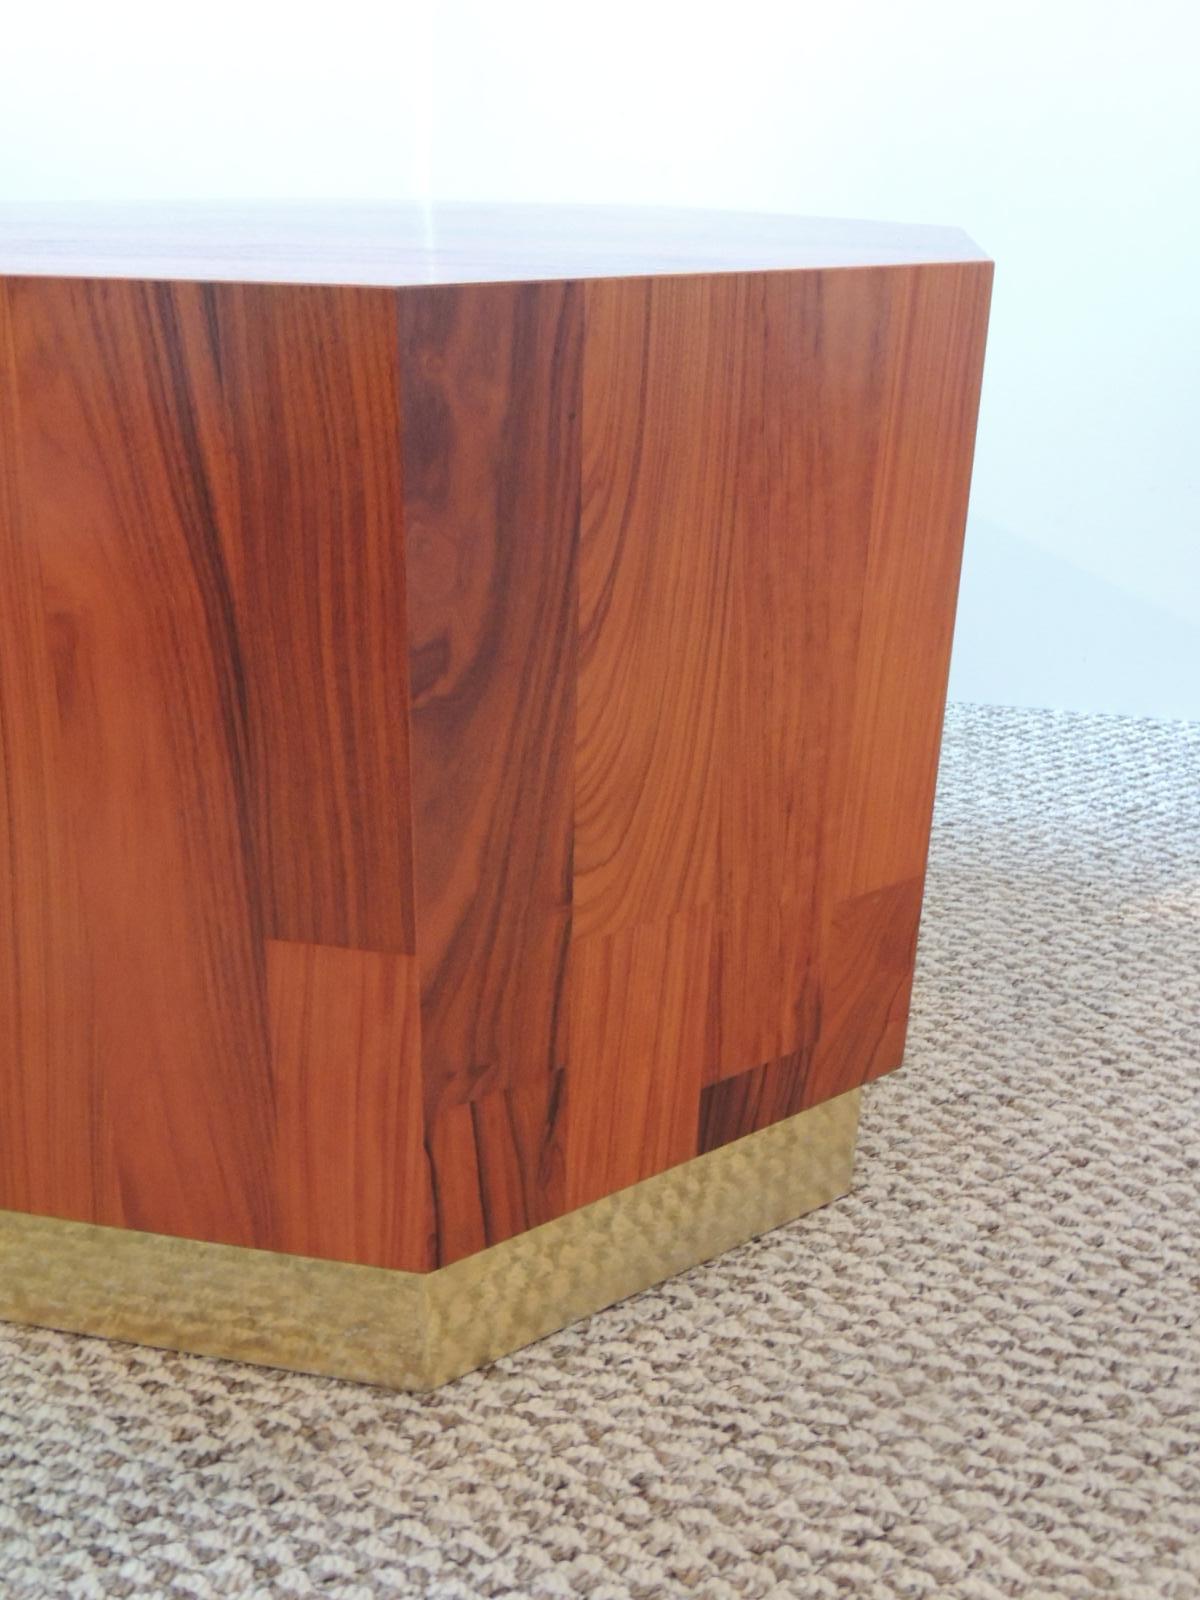 Hand-Crafted Mid-Century Modern Octagonal Coffee Table in the Manner of Probber